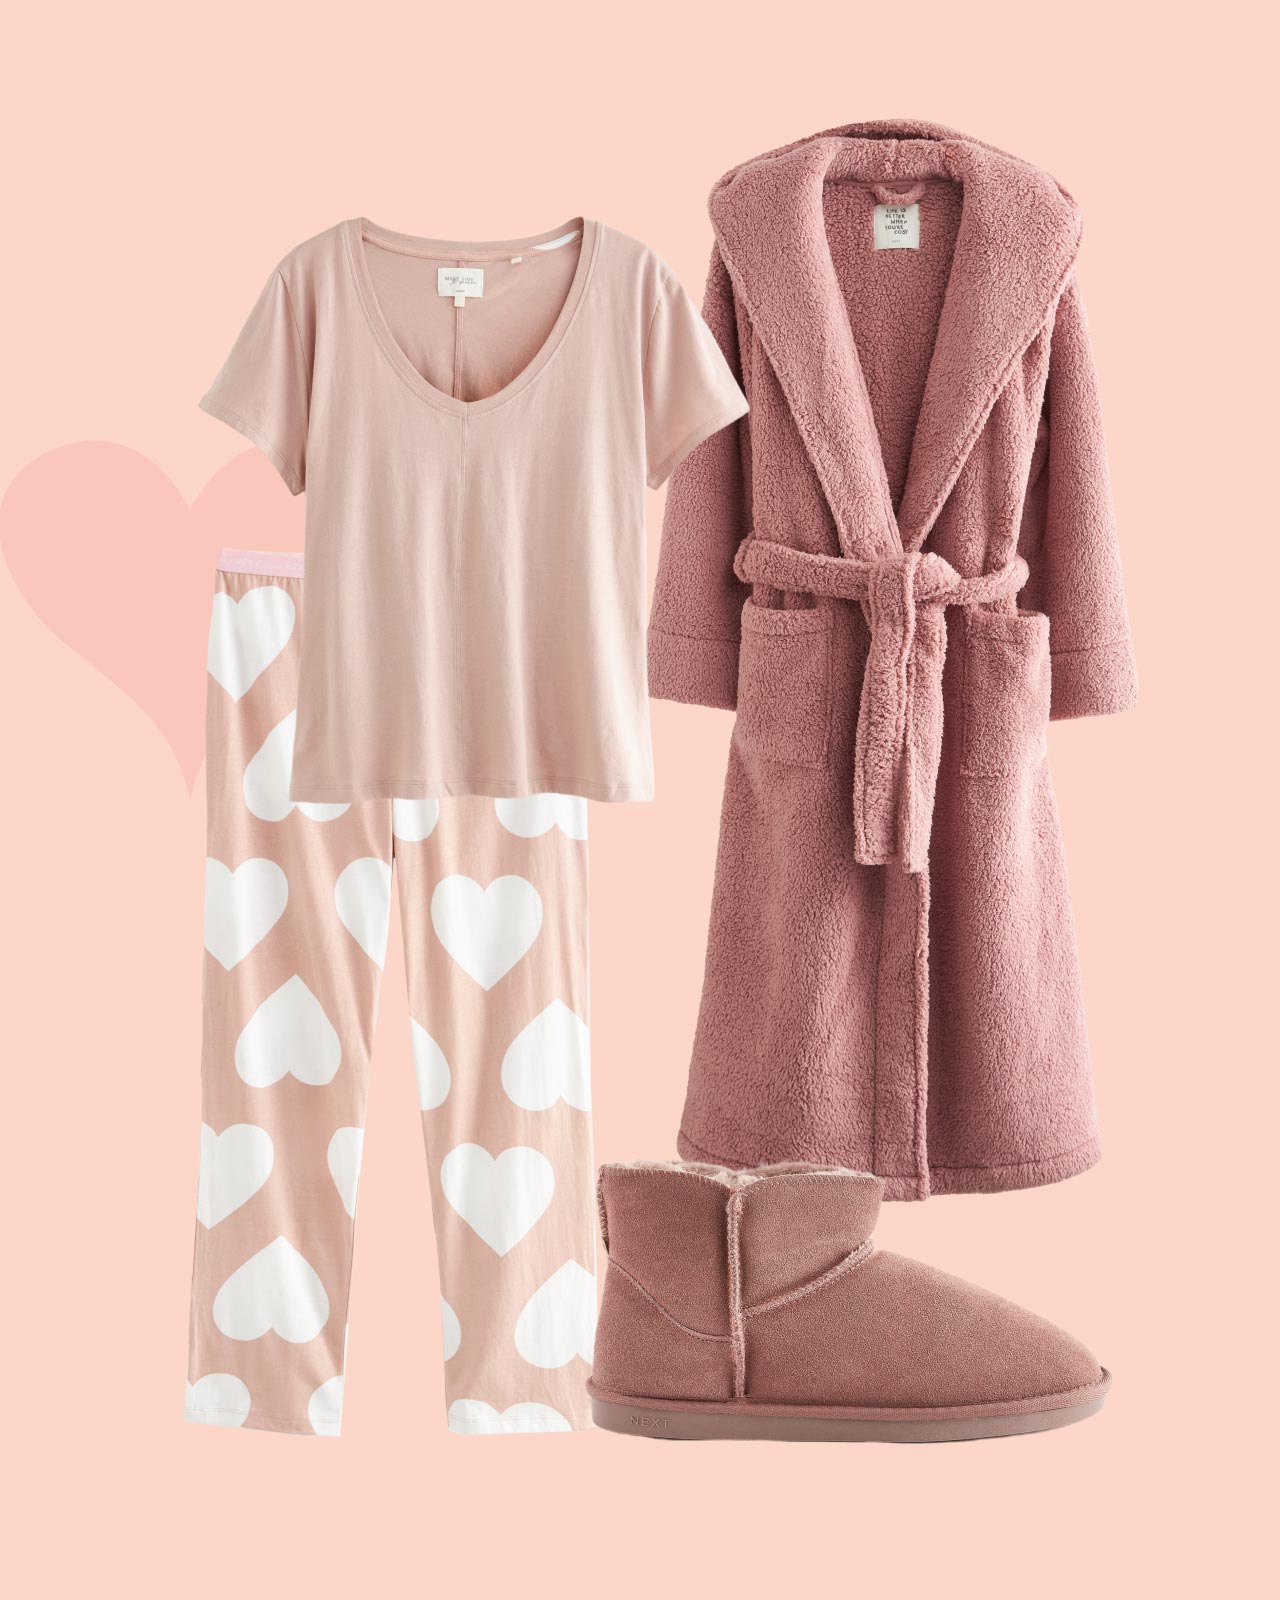 Staying In Outfit - Pink Pyjama Set with Slippers